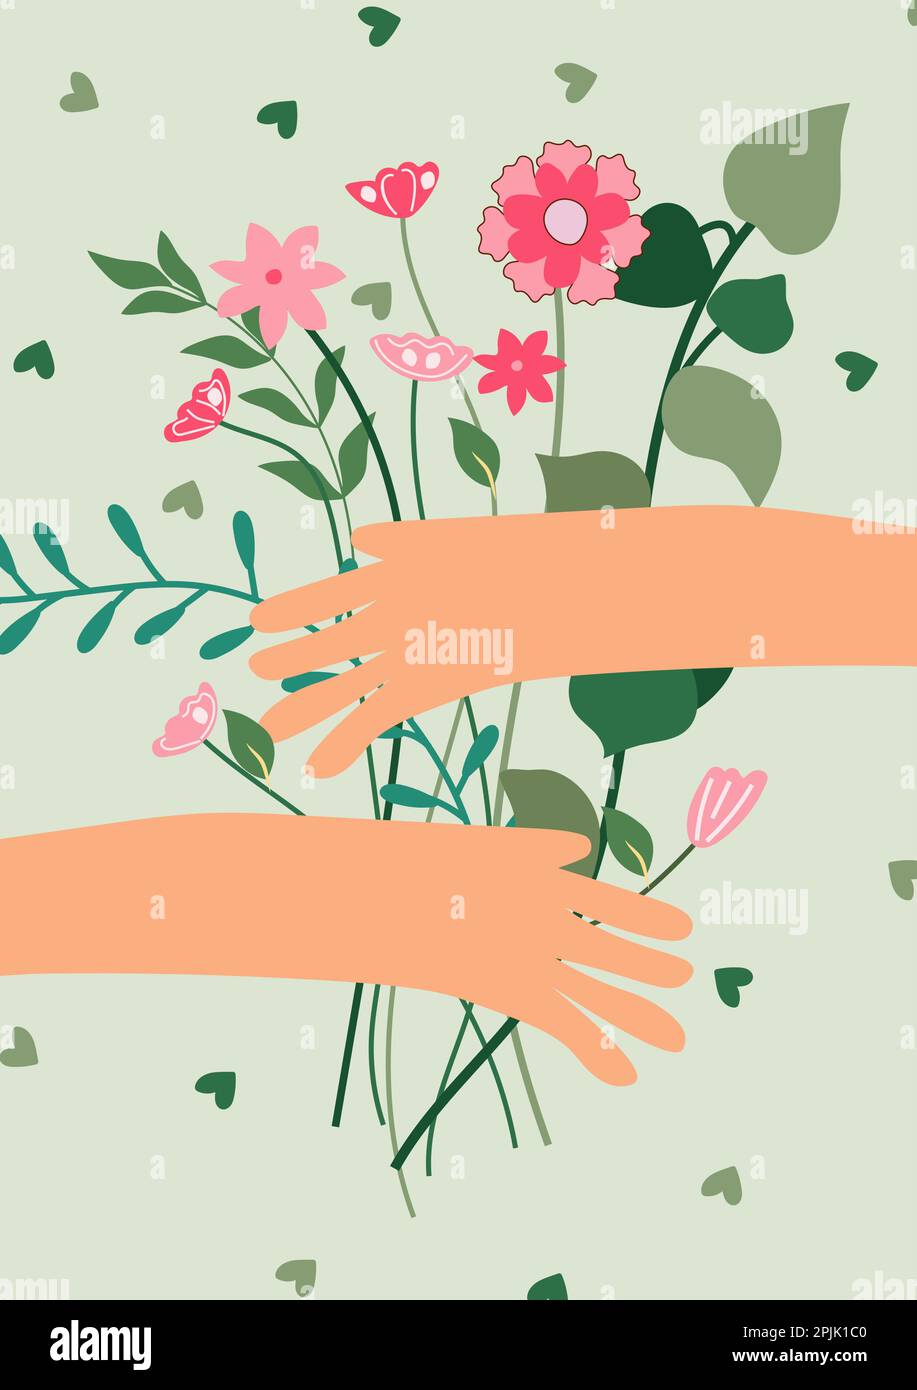 Hands embrace a bouquet of spring flowers. A floral arrangement for celebrating a birthday, wedding, mother's day, spring, etc. Vector illustration. Stock Vector